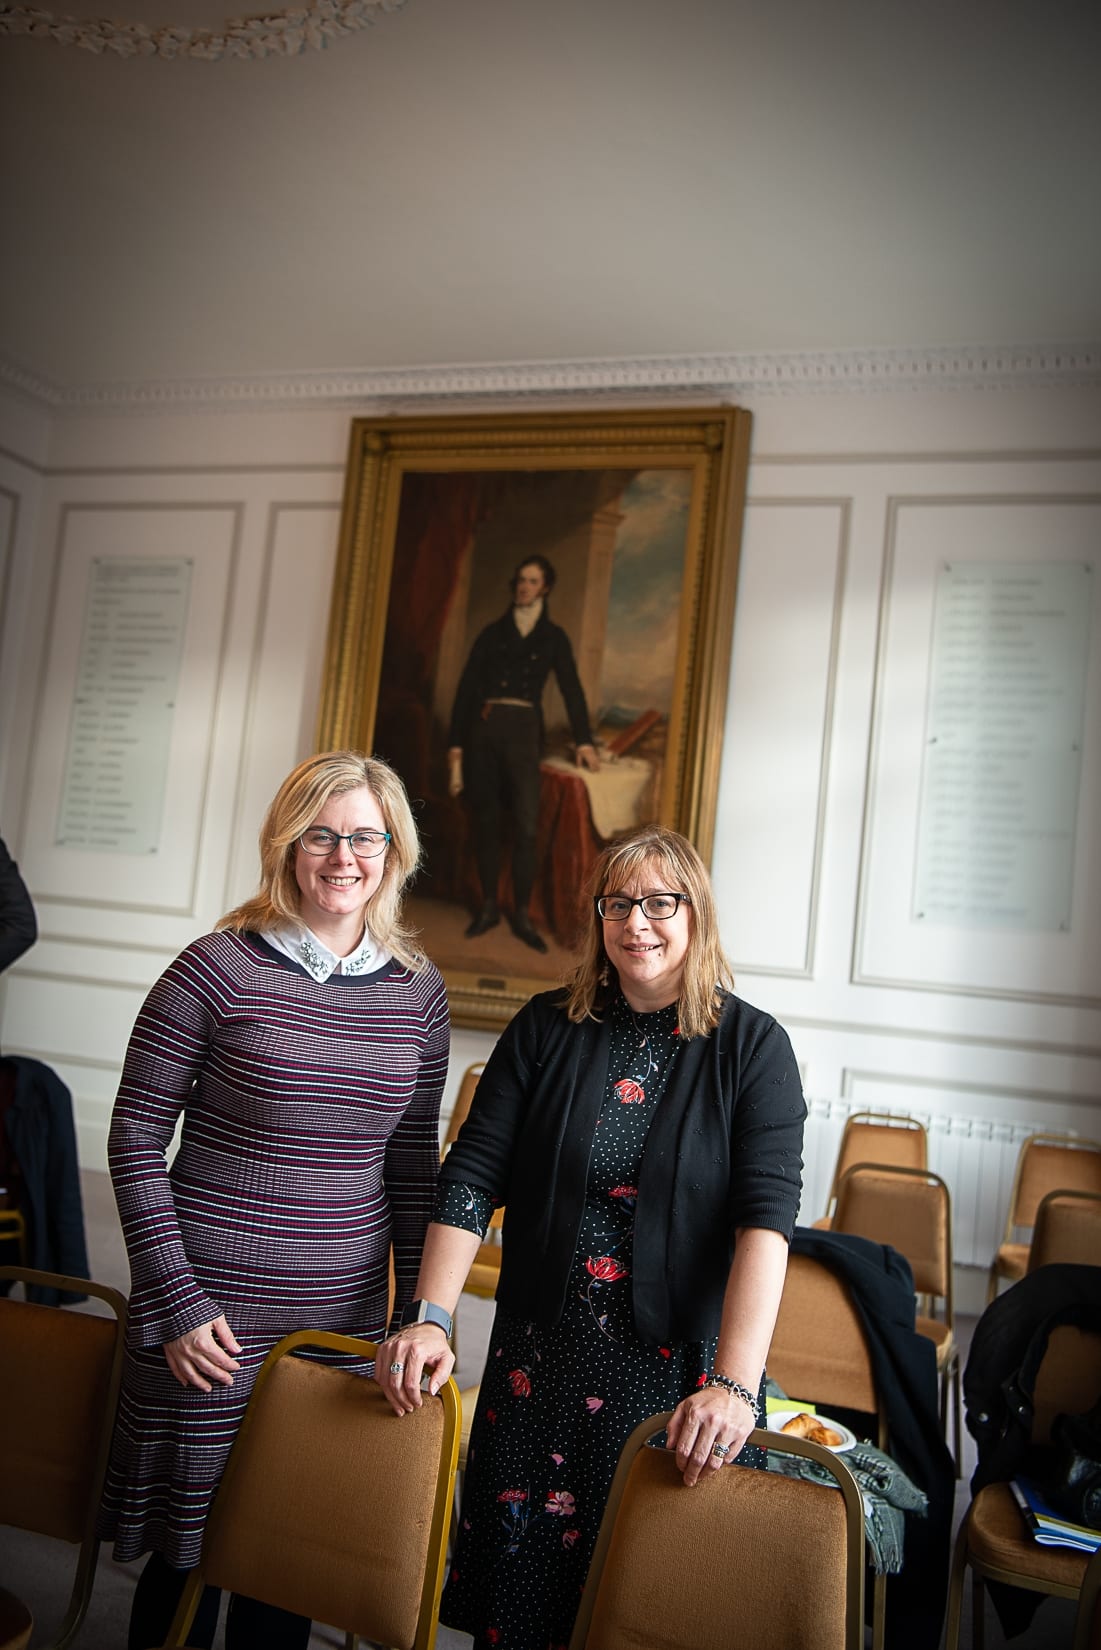 No repro fee-Aviation Impact Report Members Briefing which was held in the Limerick Chamber Boardroom on Tuesday 05th November  - From Left to Right: Noreen O’Malley and Deborah Tudge both from UL Conference and Events. Photo credit Shauna Kennedy